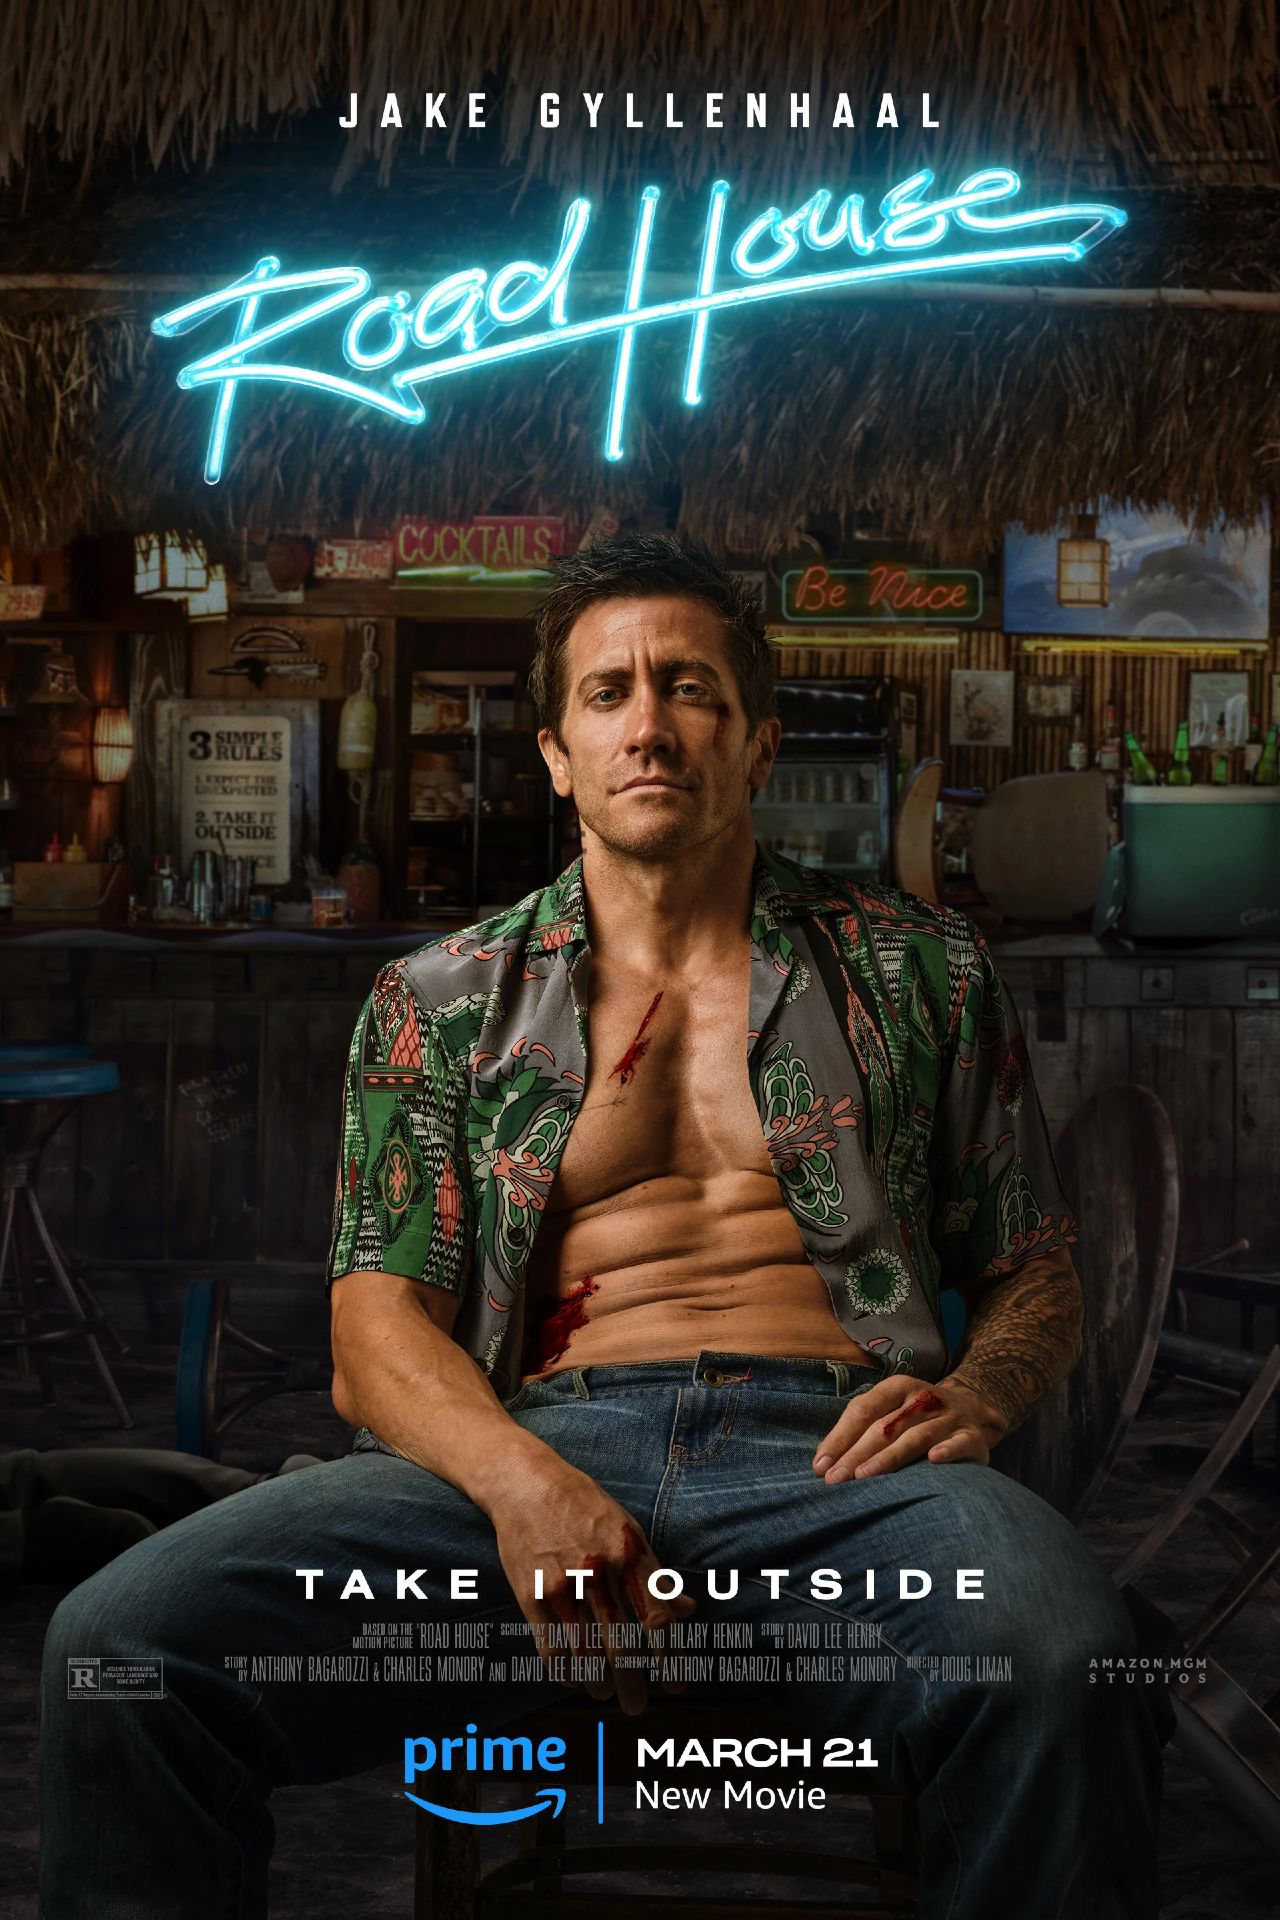 Road House Reviews Are In Does Jake Gyllenhaal's Remake Live Up To